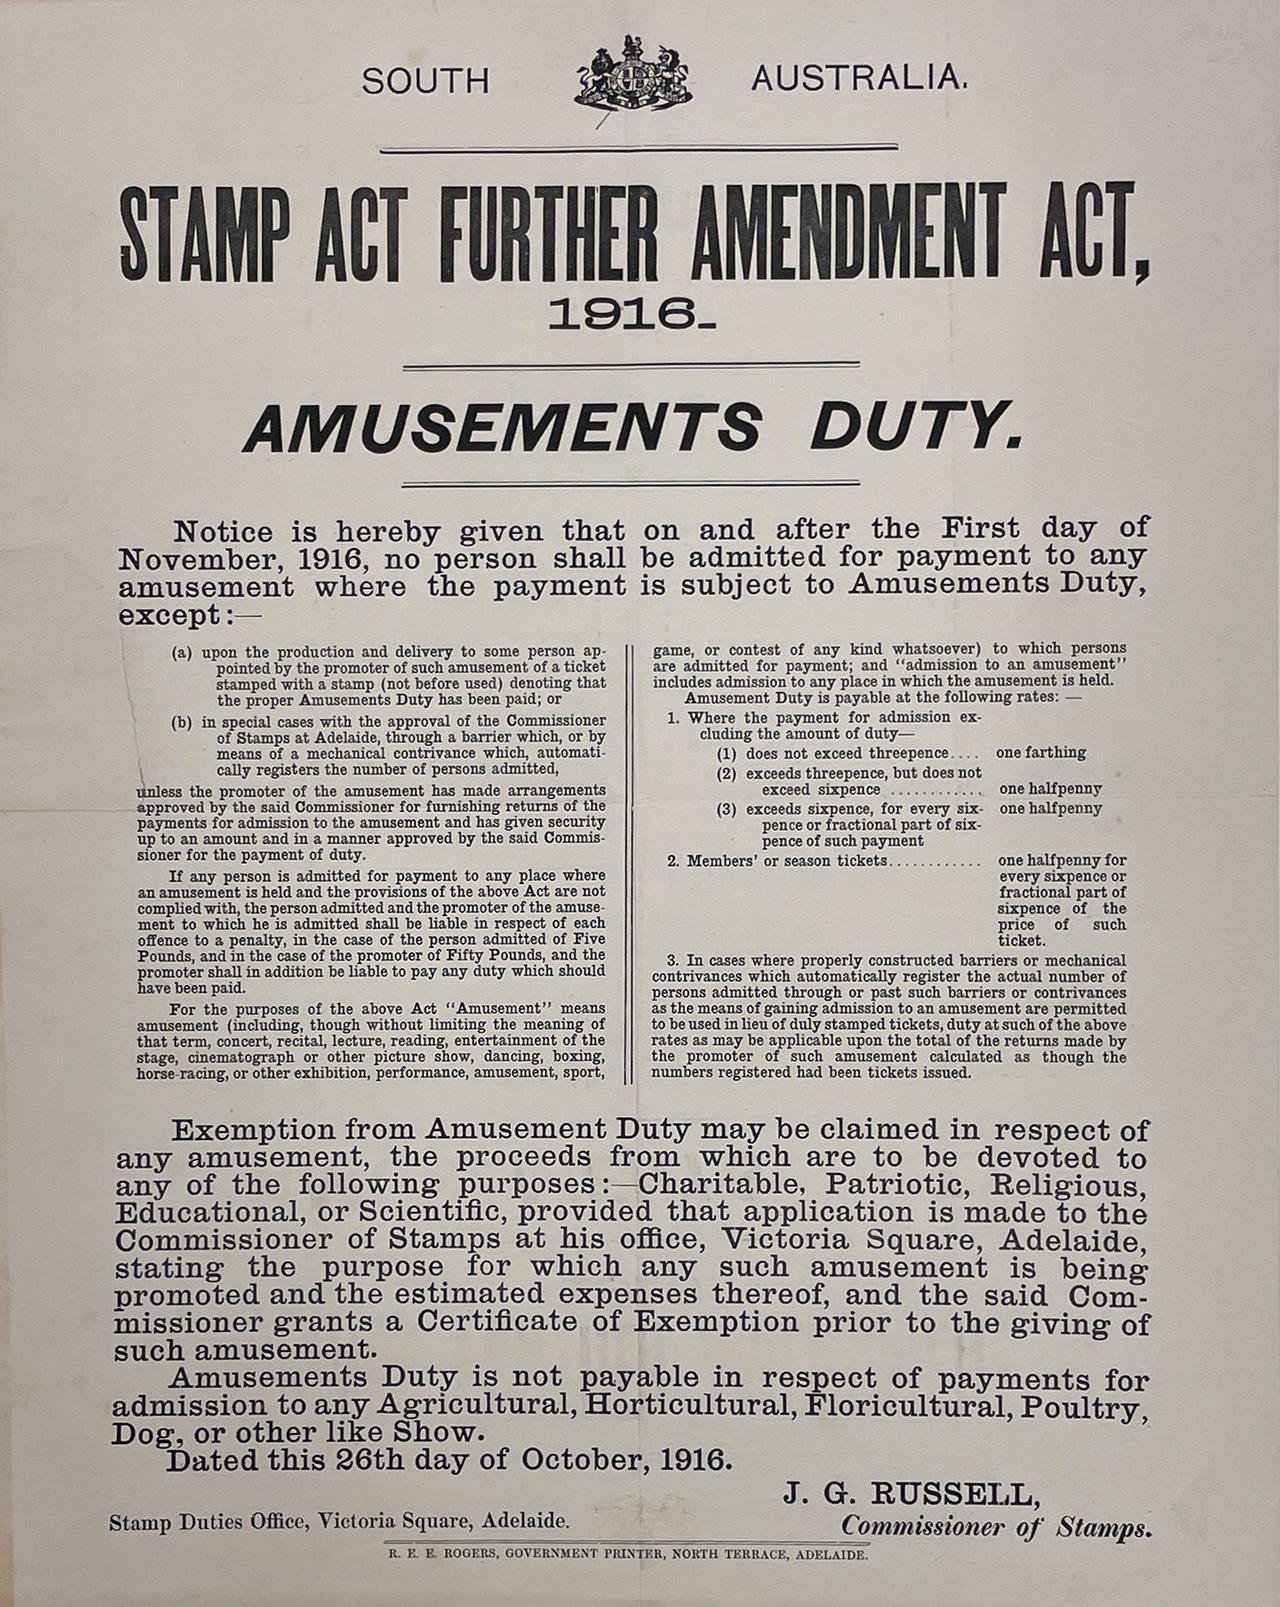 Stamp Act Further Amendment Act, introducing an amusement duty, Poster, 1916.